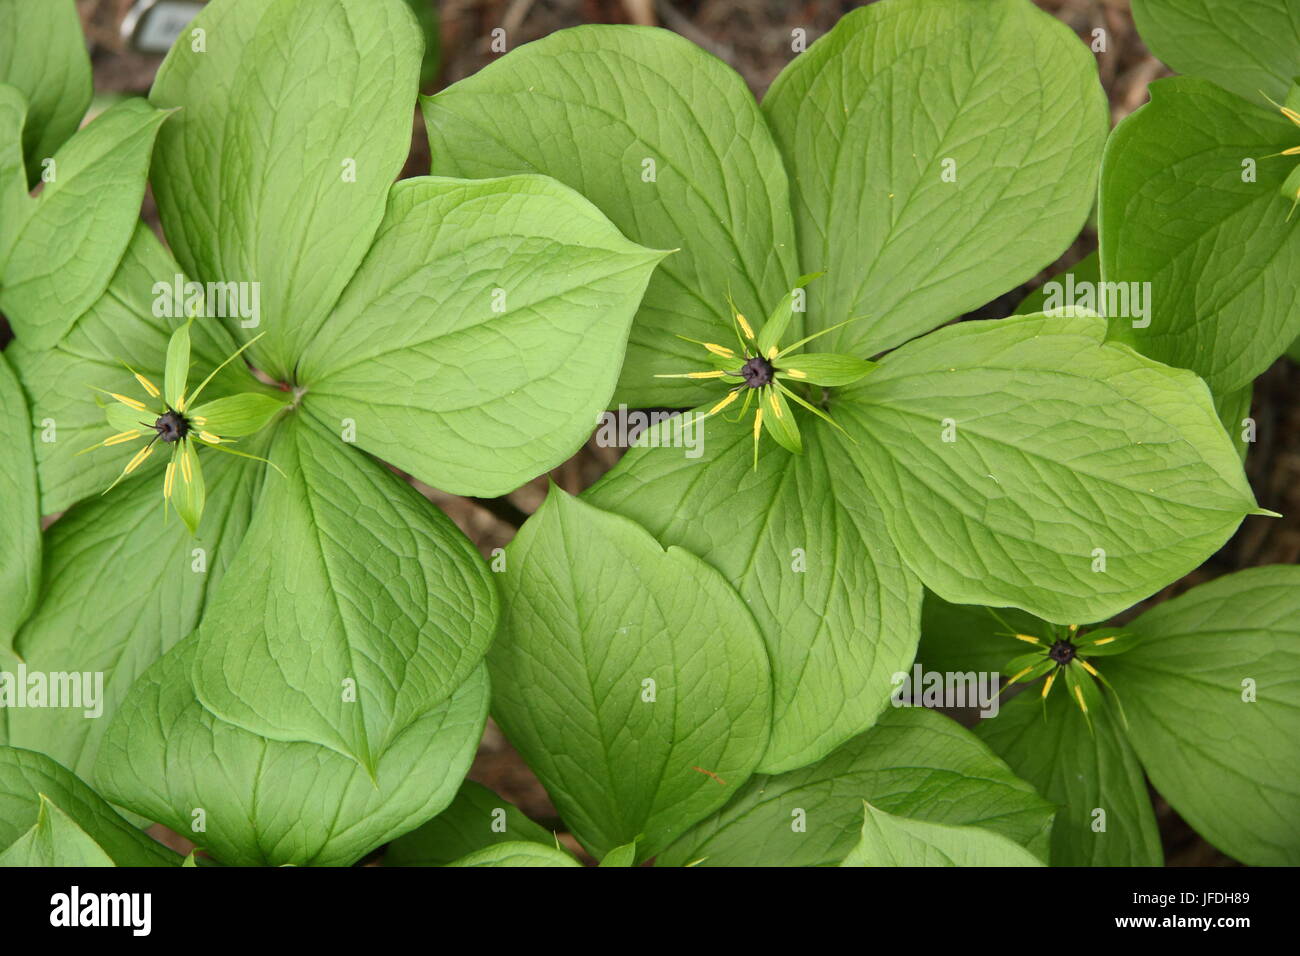 Paris Quadrifolia, a woodland plant, also called Herb Paris, displays its single berry above four distinctive leaves in a UK garden in spring Stock Photo